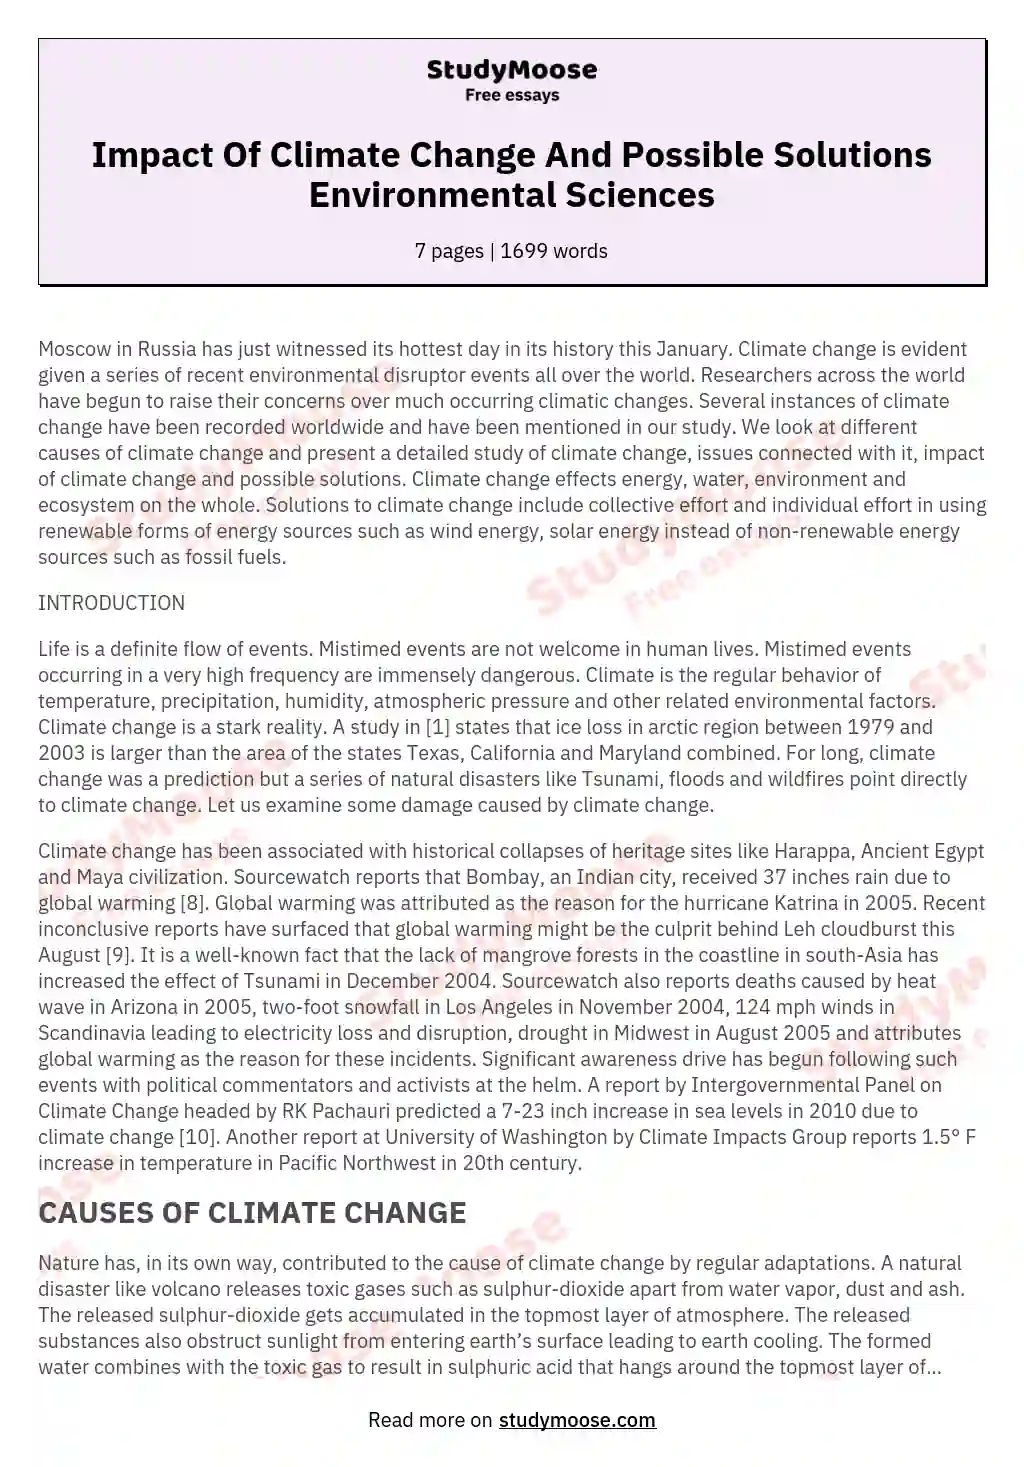 essay hooks about climate change